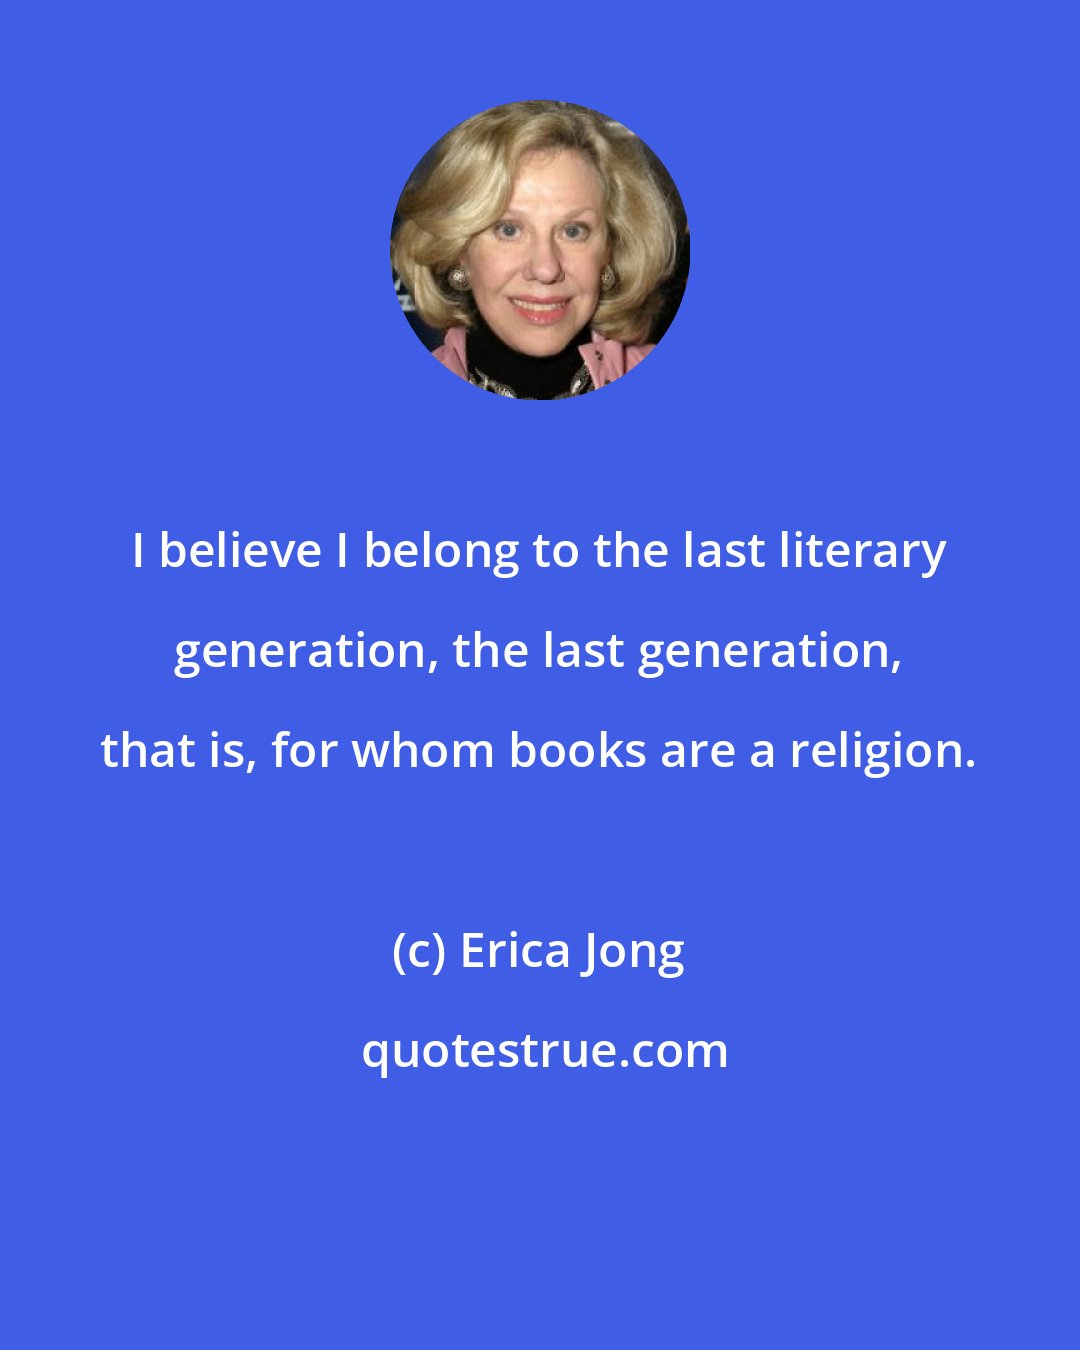 Erica Jong: I believe I belong to the last literary generation, the last generation, that is, for whom books are a religion.